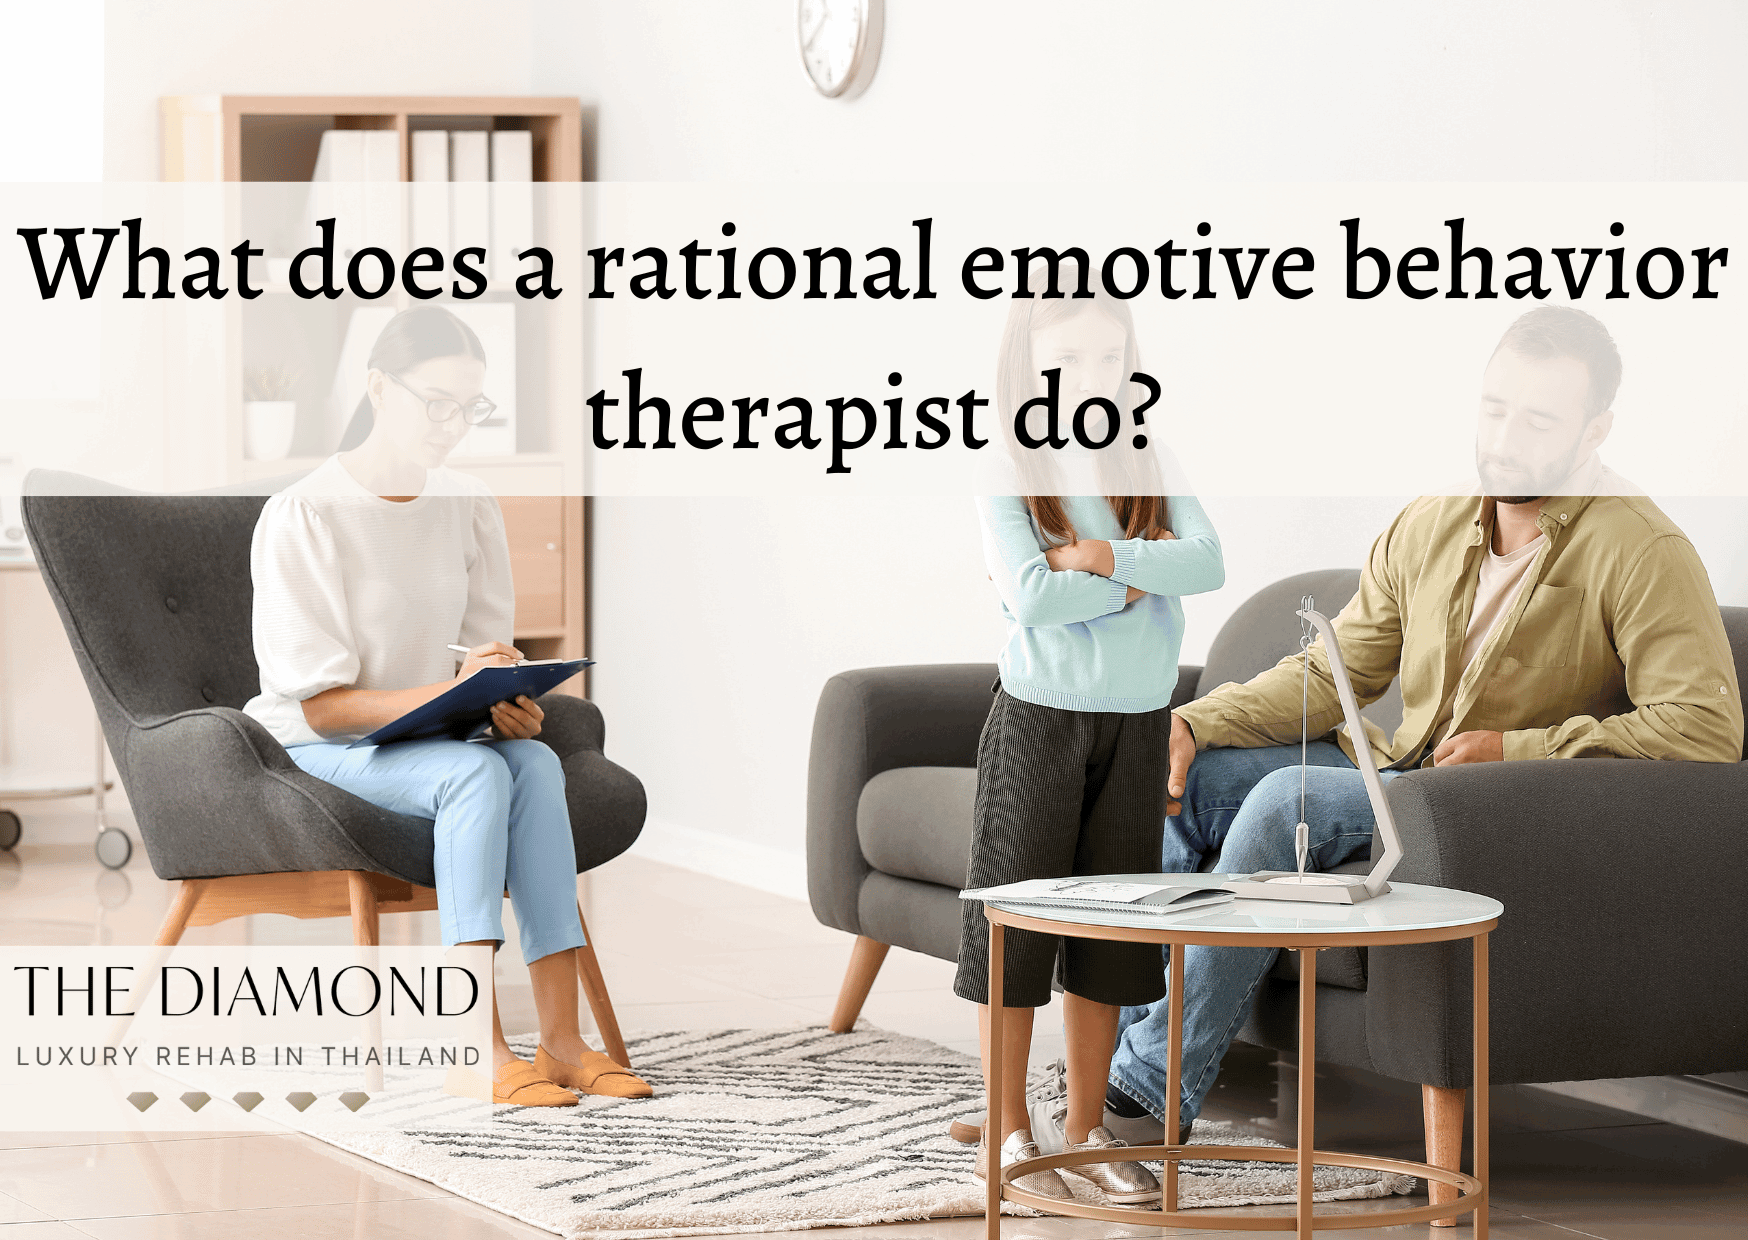 What does a rational emotive behavior therapist do